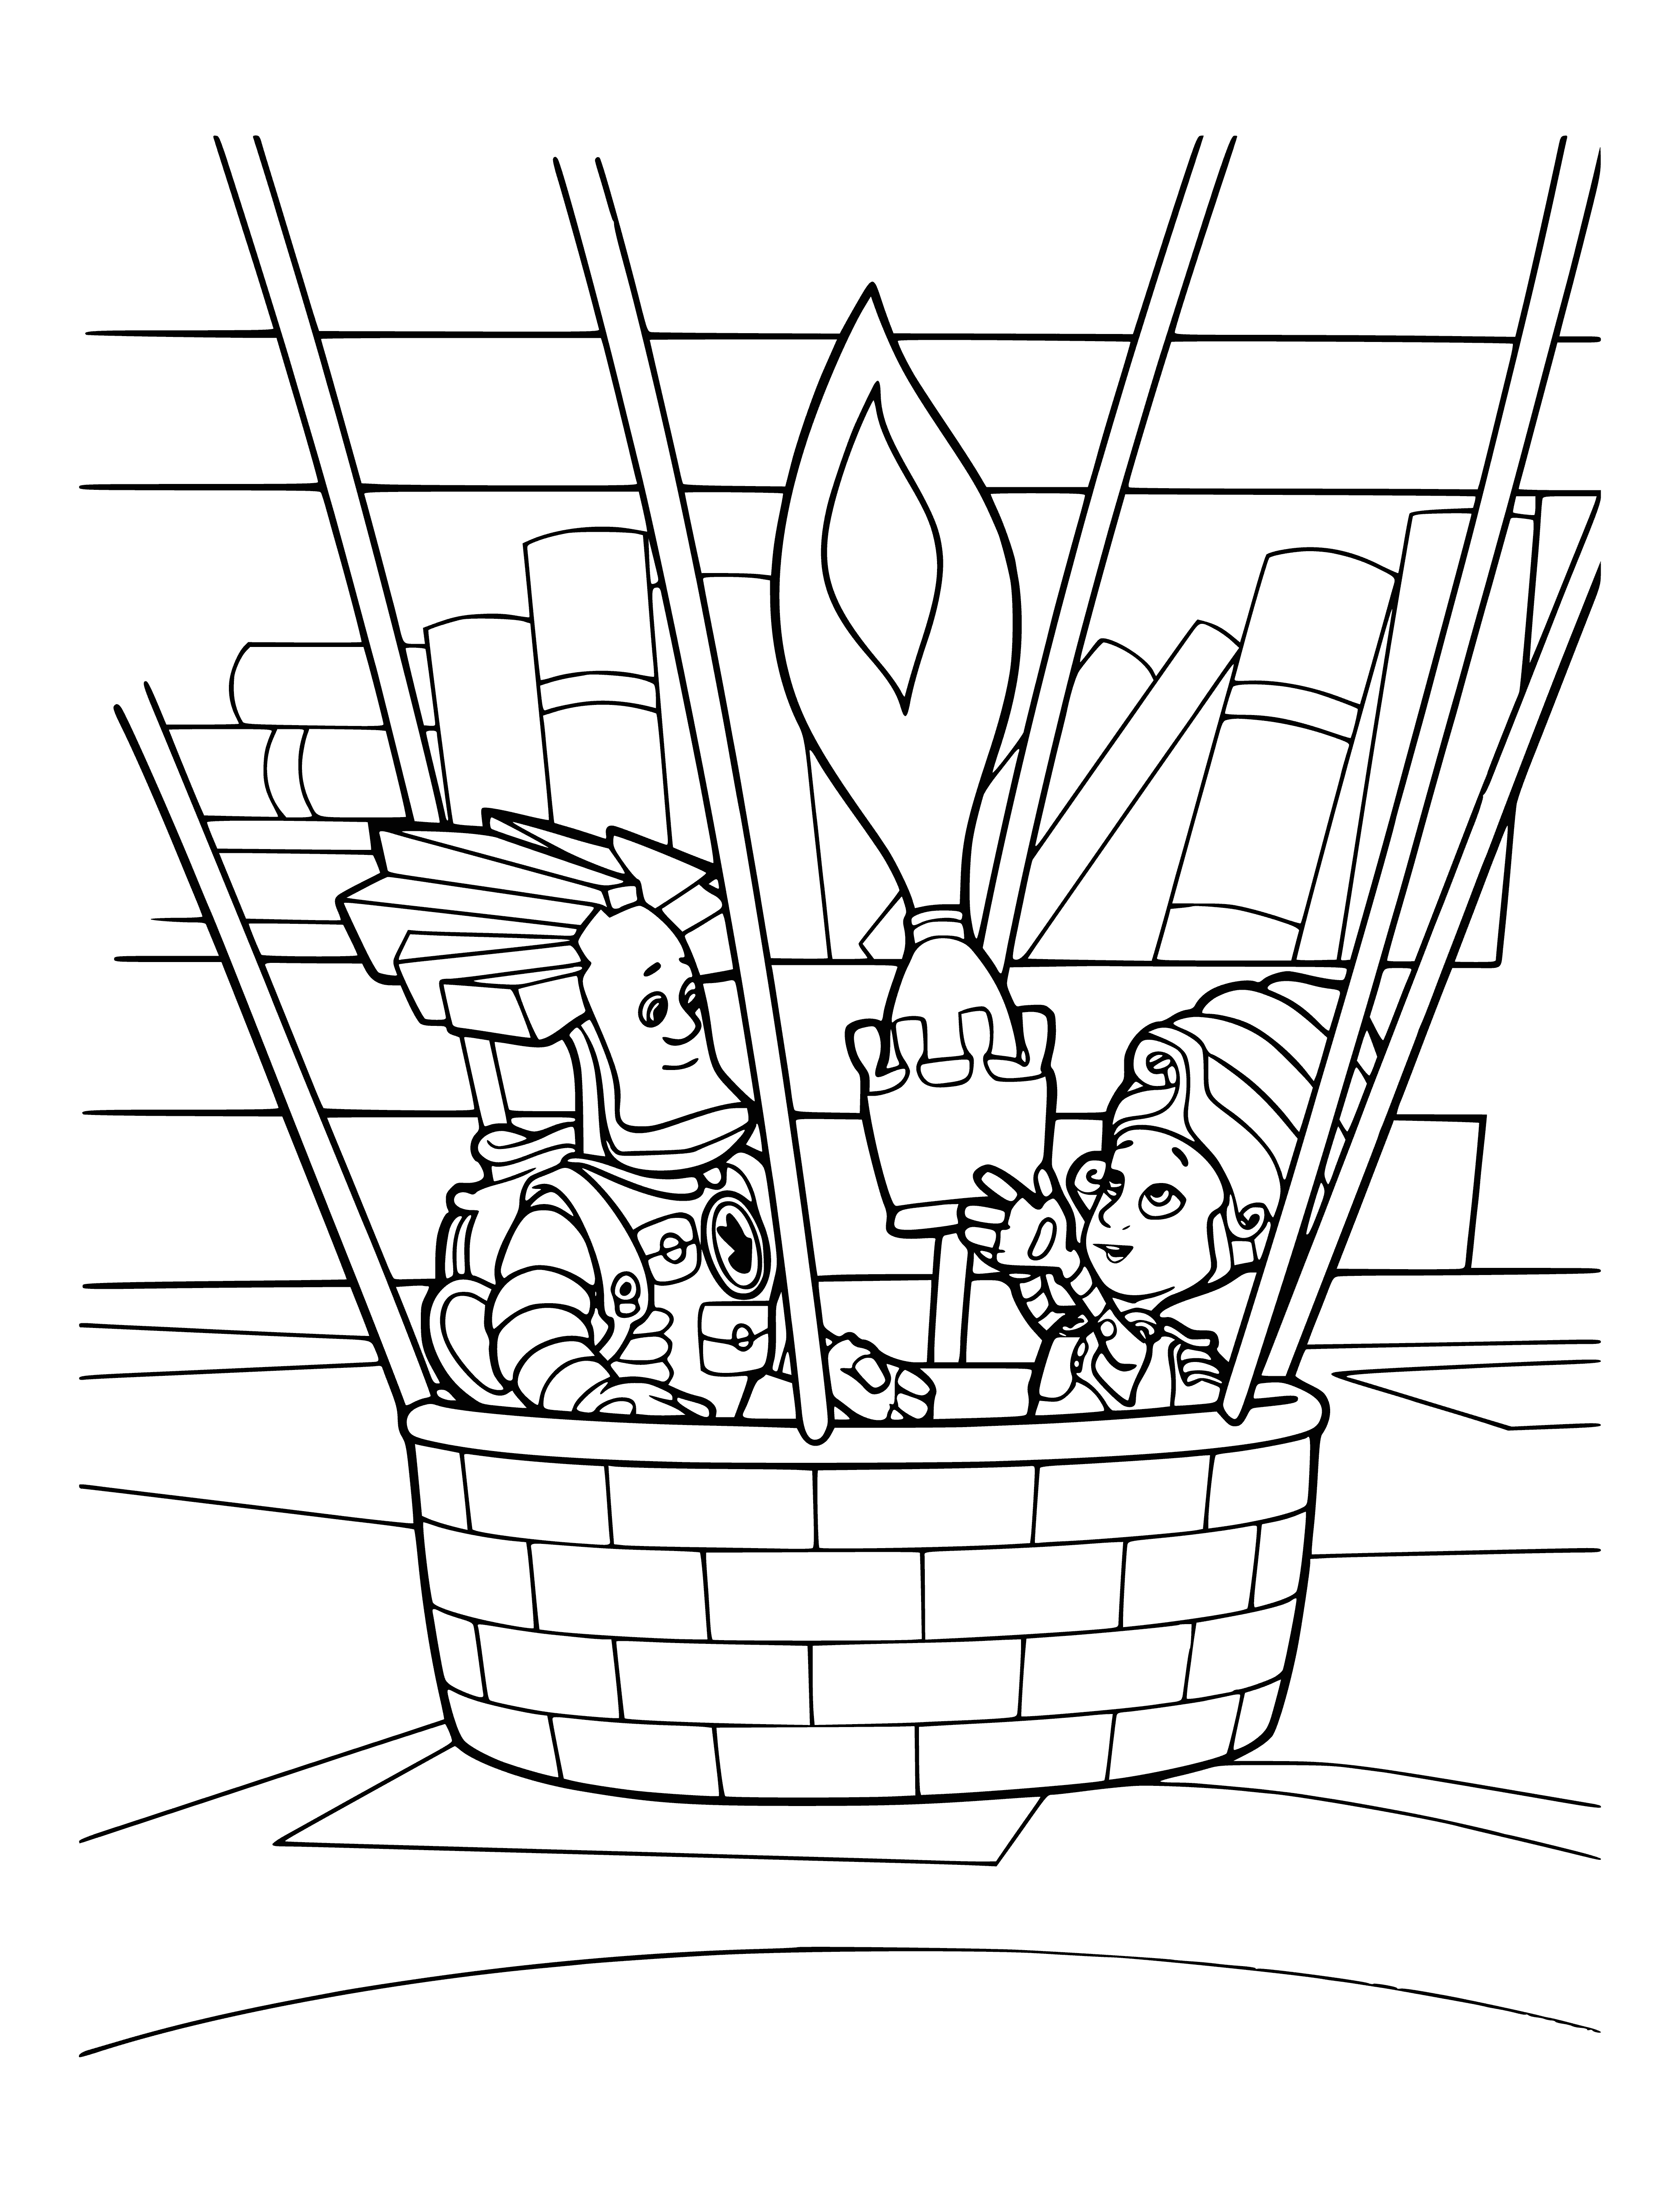 coloring page: The Fixies are two cheerful creatures who live and work inside appliances. They each have a toolbelt and hold a hammer and a screwdriver, respectively.